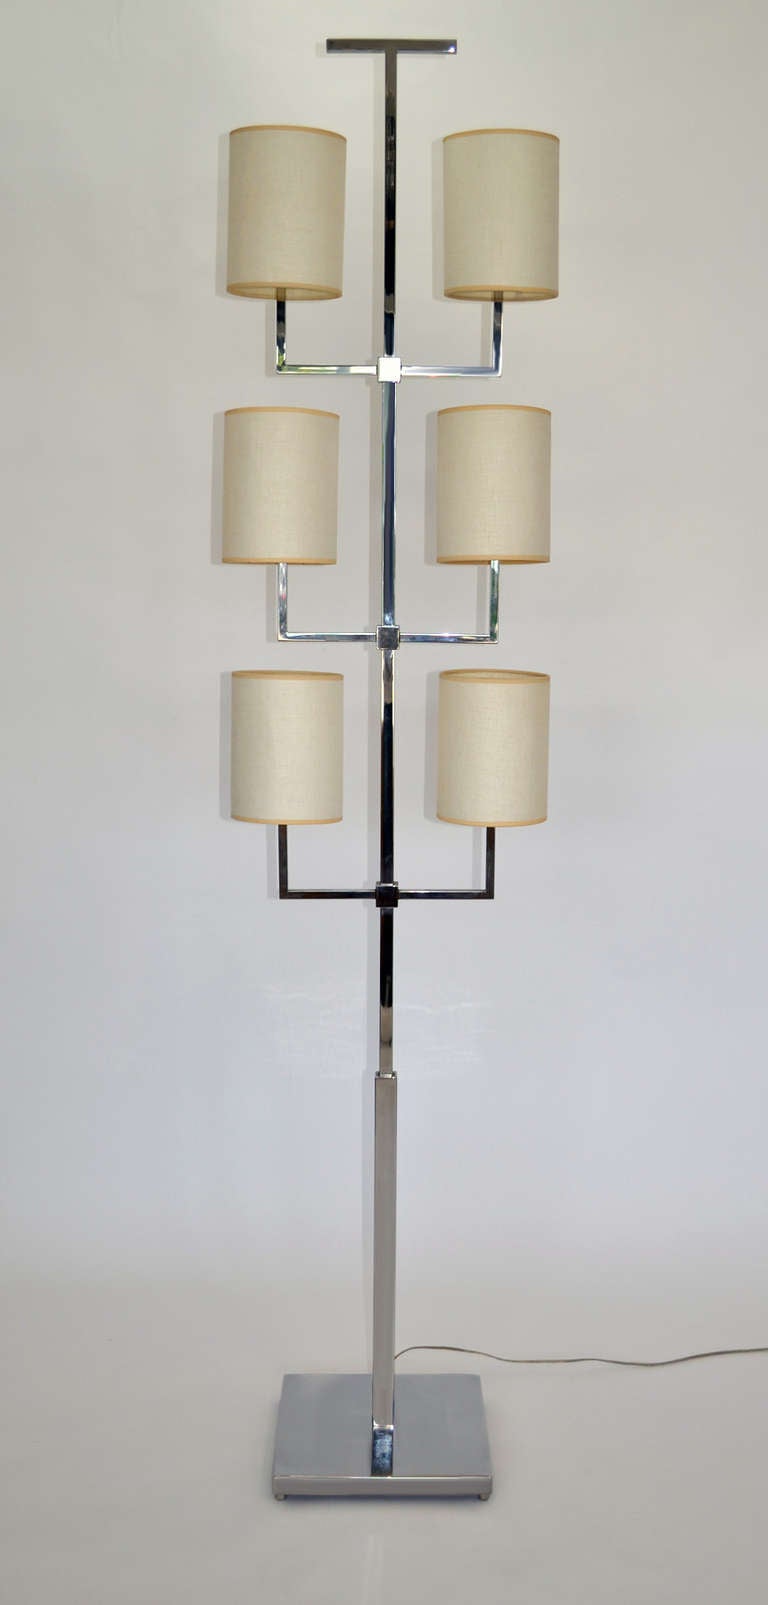 Rare floor lamp by Tommi Parzinger for Lightolier. Six-arm, nickel-plated steel, trident-style with original shades. 1960s limited production in fantastic condition.